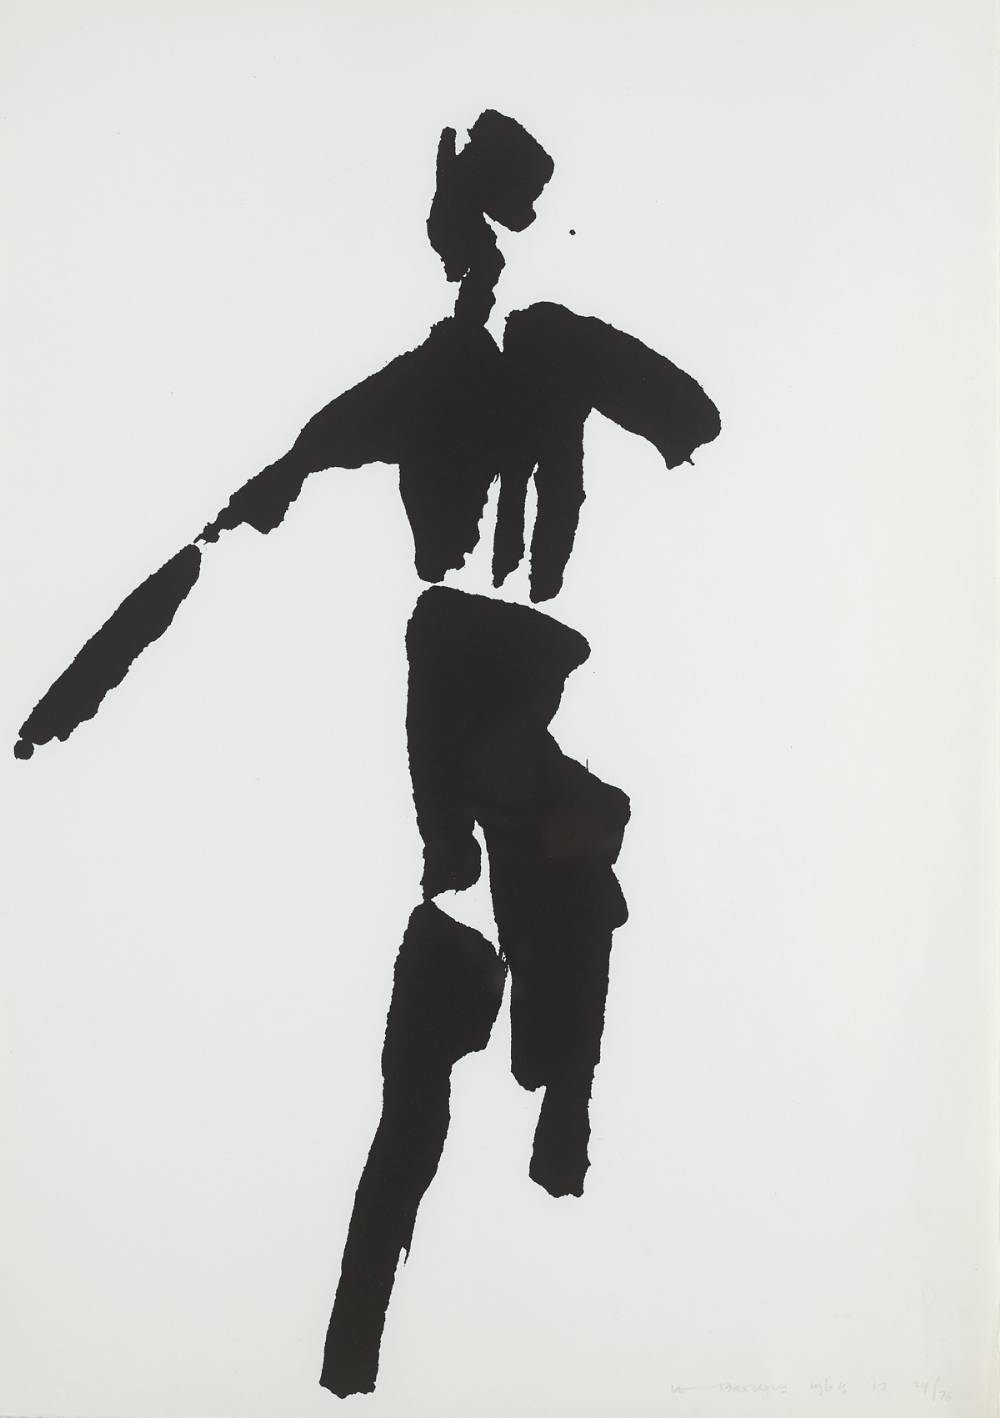 THE TIN. SWORDSMAN, 1969 by Louis le Brocquy HRHA (1916-2012) at Whyte's Auctions